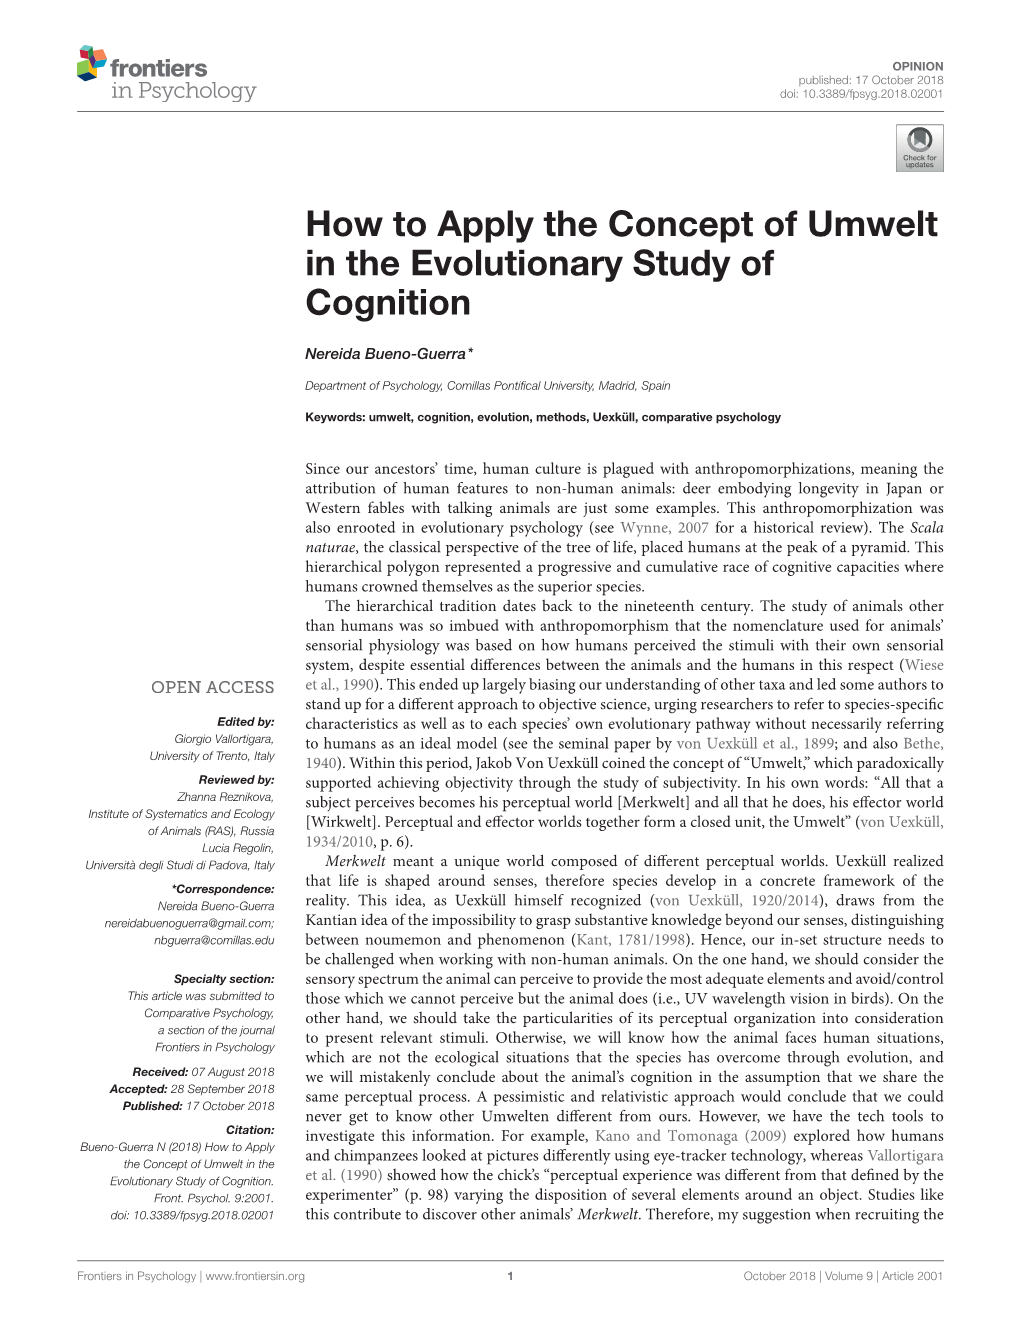 How to Apply the Concept of Umwelt in the Evolutionary Study of Cognition